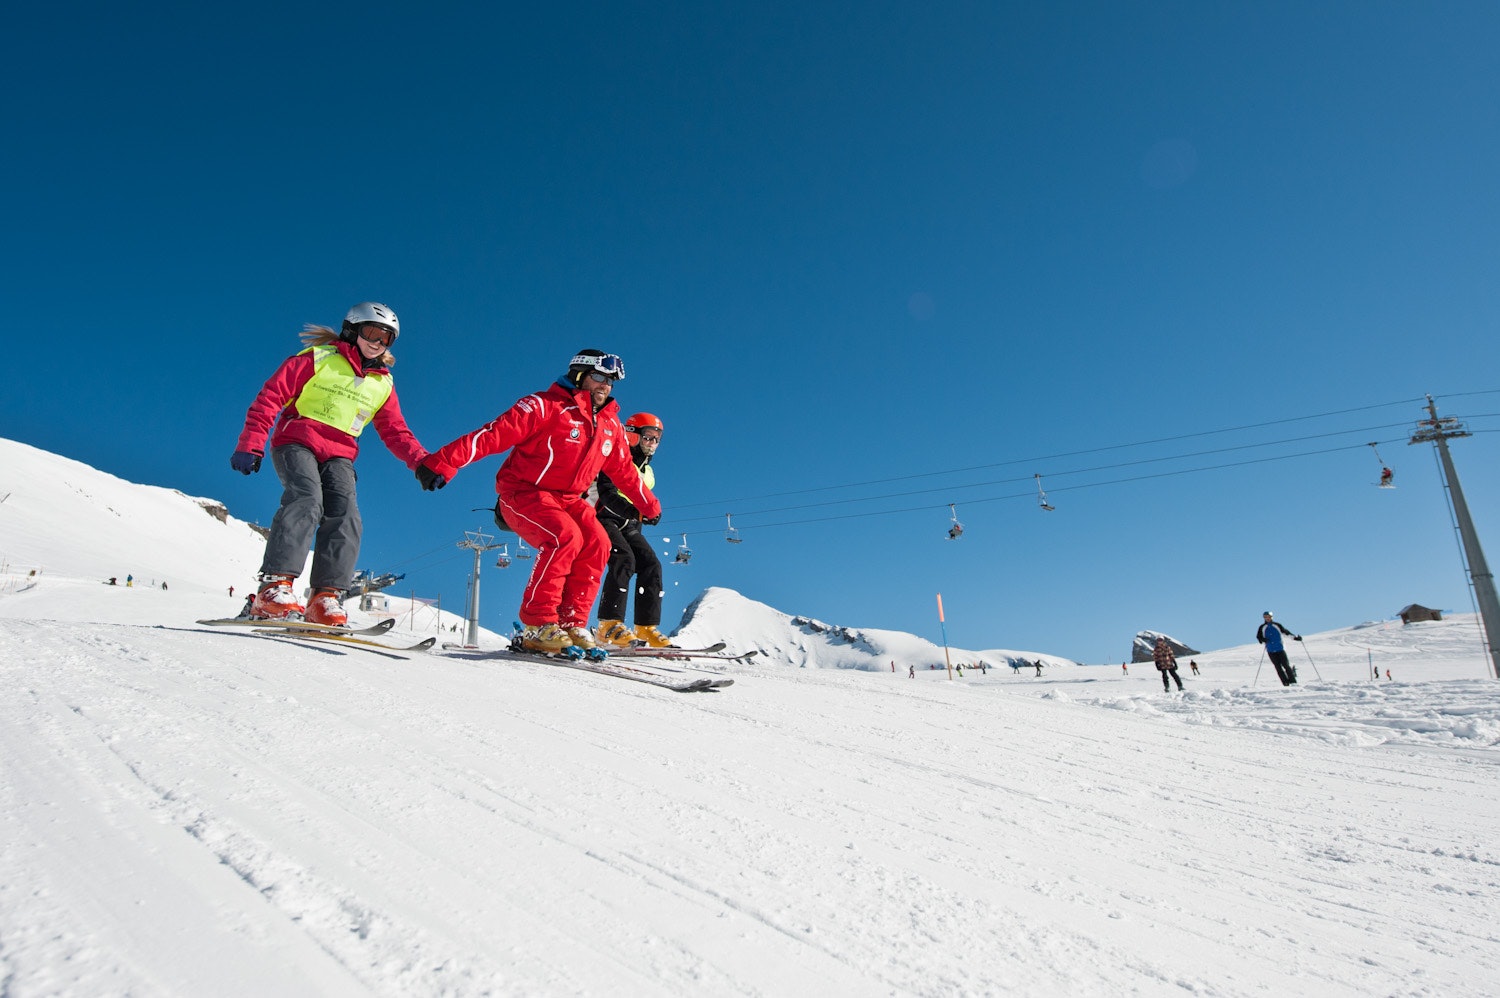 Voucher for an unforgettable snow sports experience